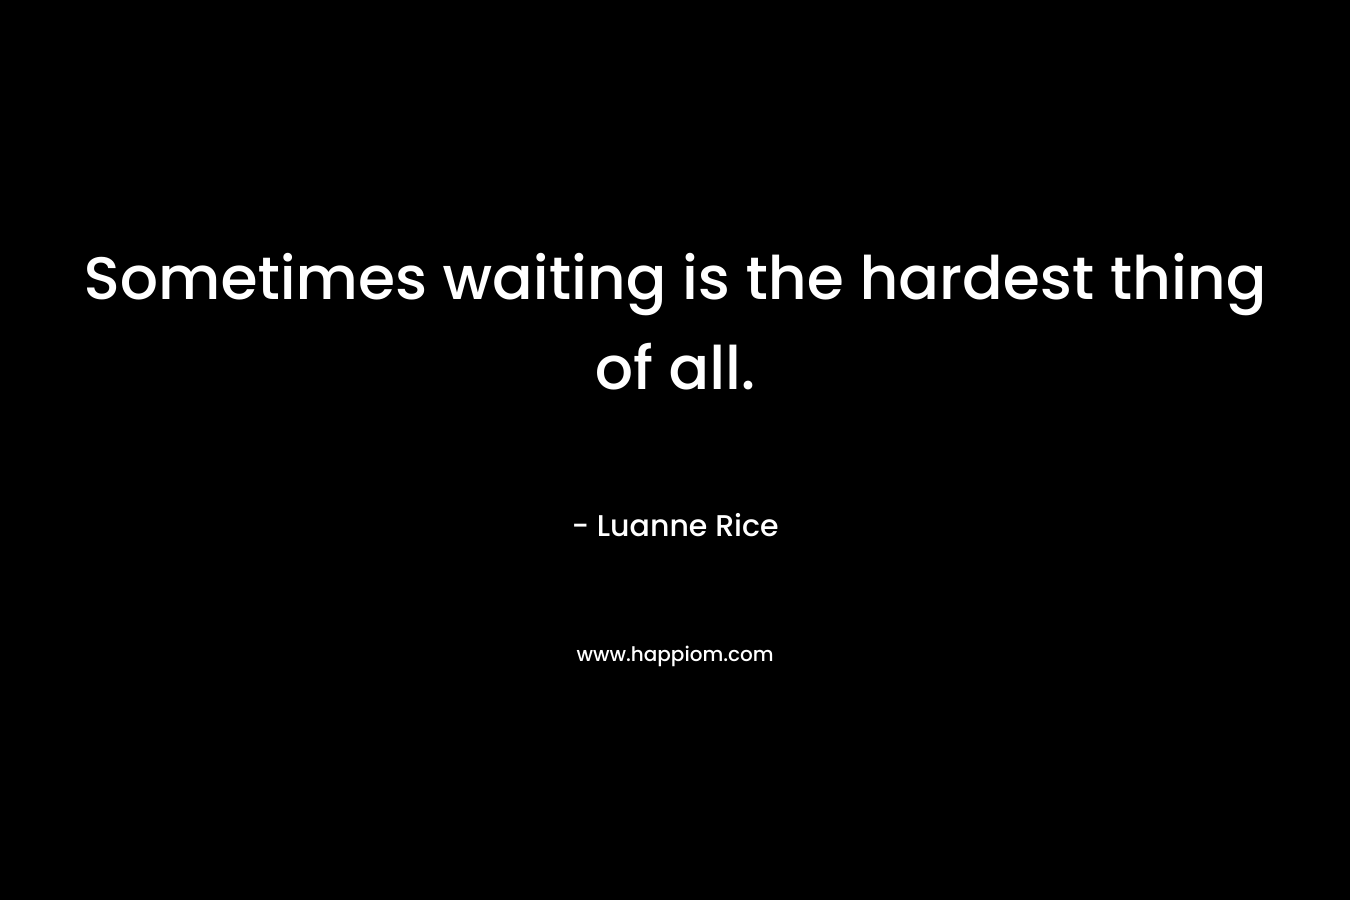 Sometimes waiting is the hardest thing of all.